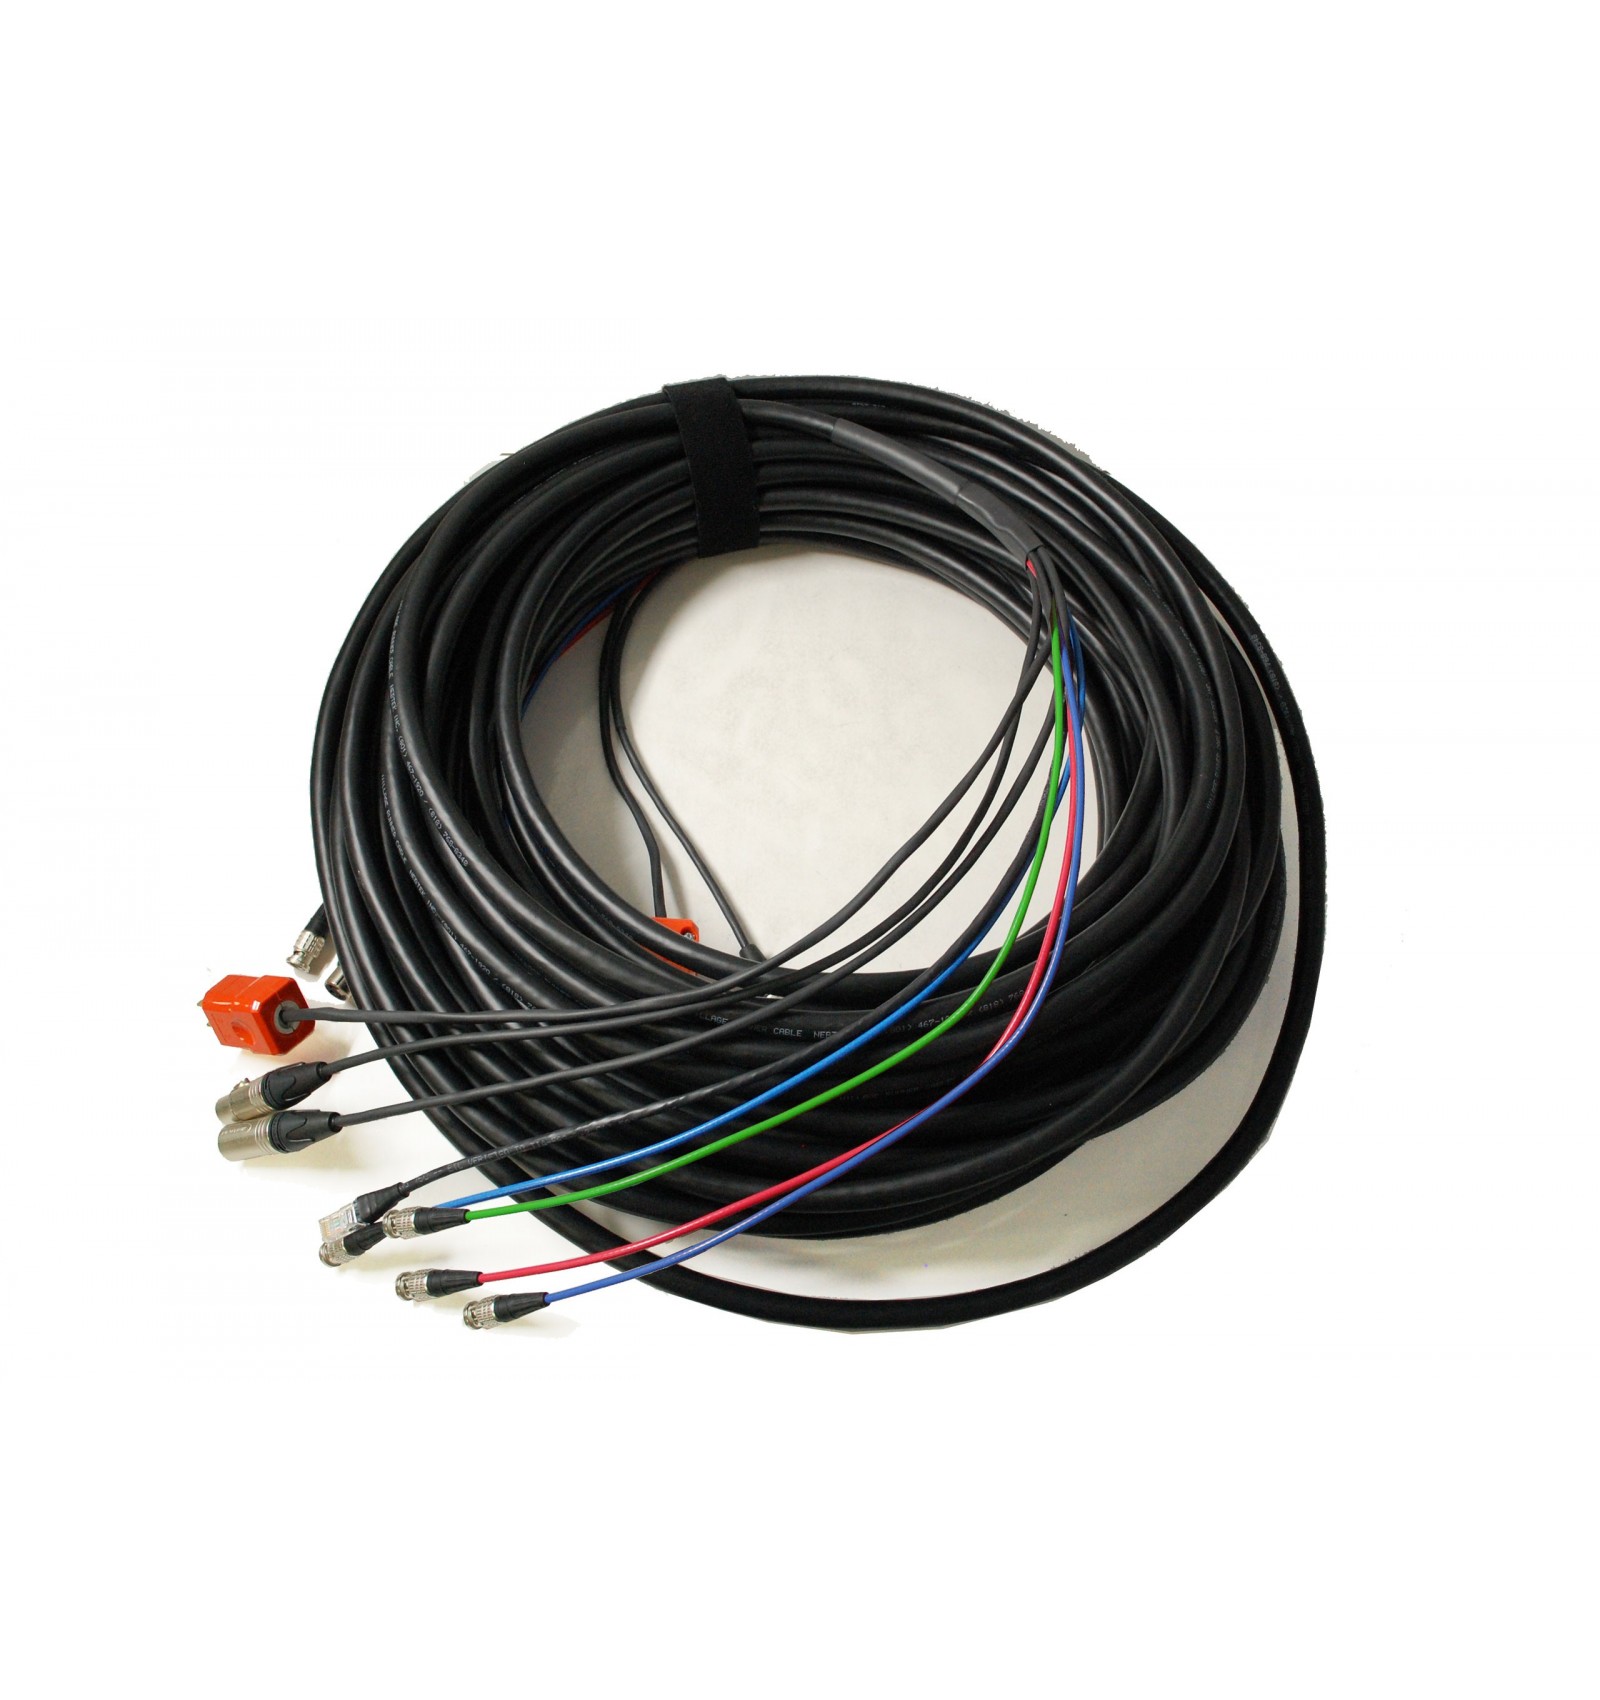 Village Runner Cable - 4 SDI lines, 2 Audio lines, 1 Ethernet and